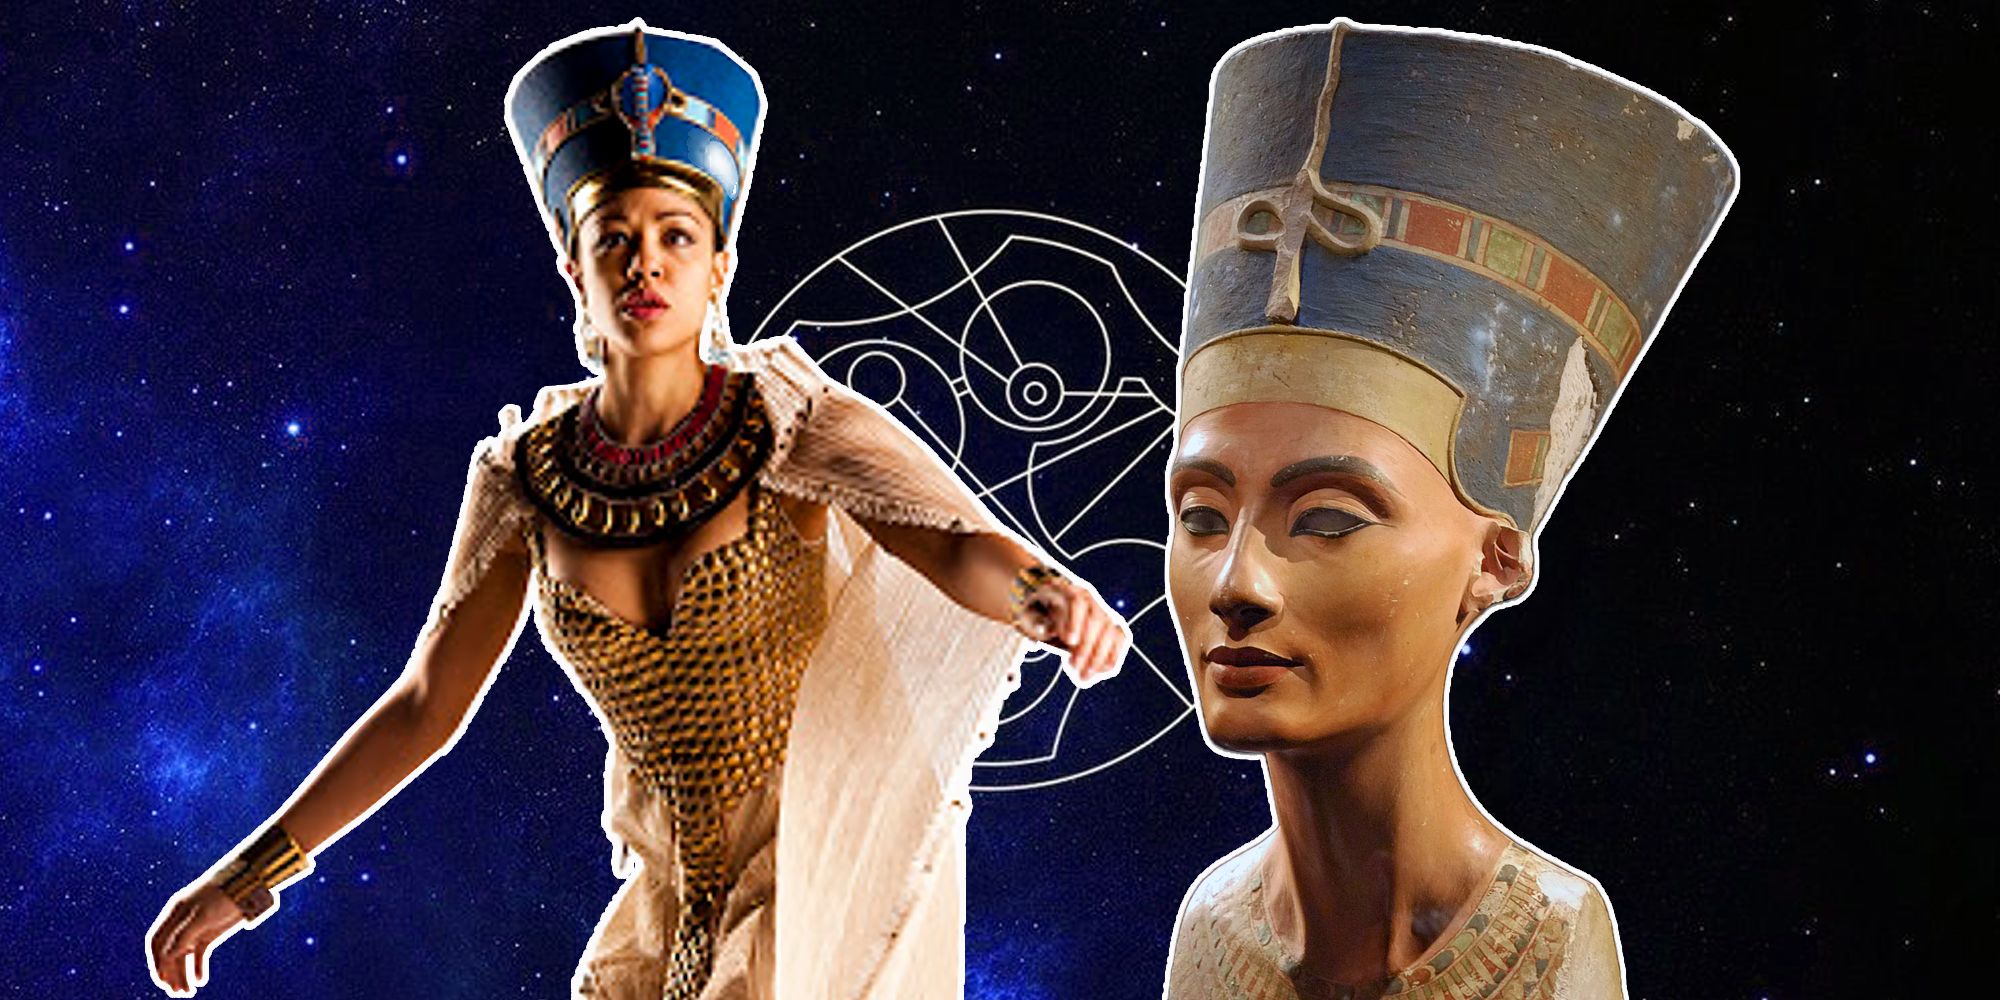 'Doctor Who's Queen Nefertiti (Riann Steele) was as tenacious as her real-life counterpart was thought to be